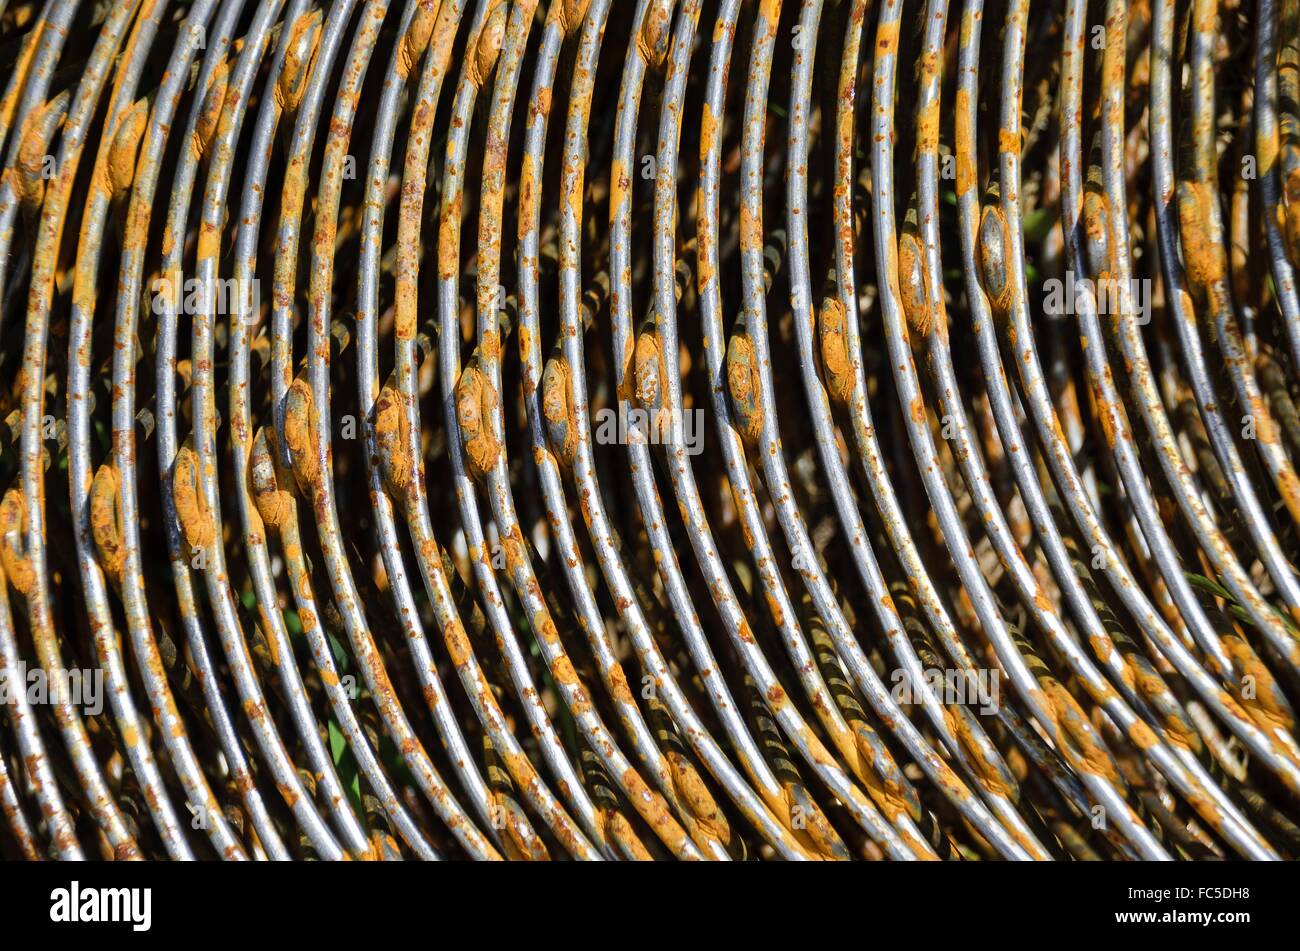 rusty bends of reinforcing bar Stock Photo